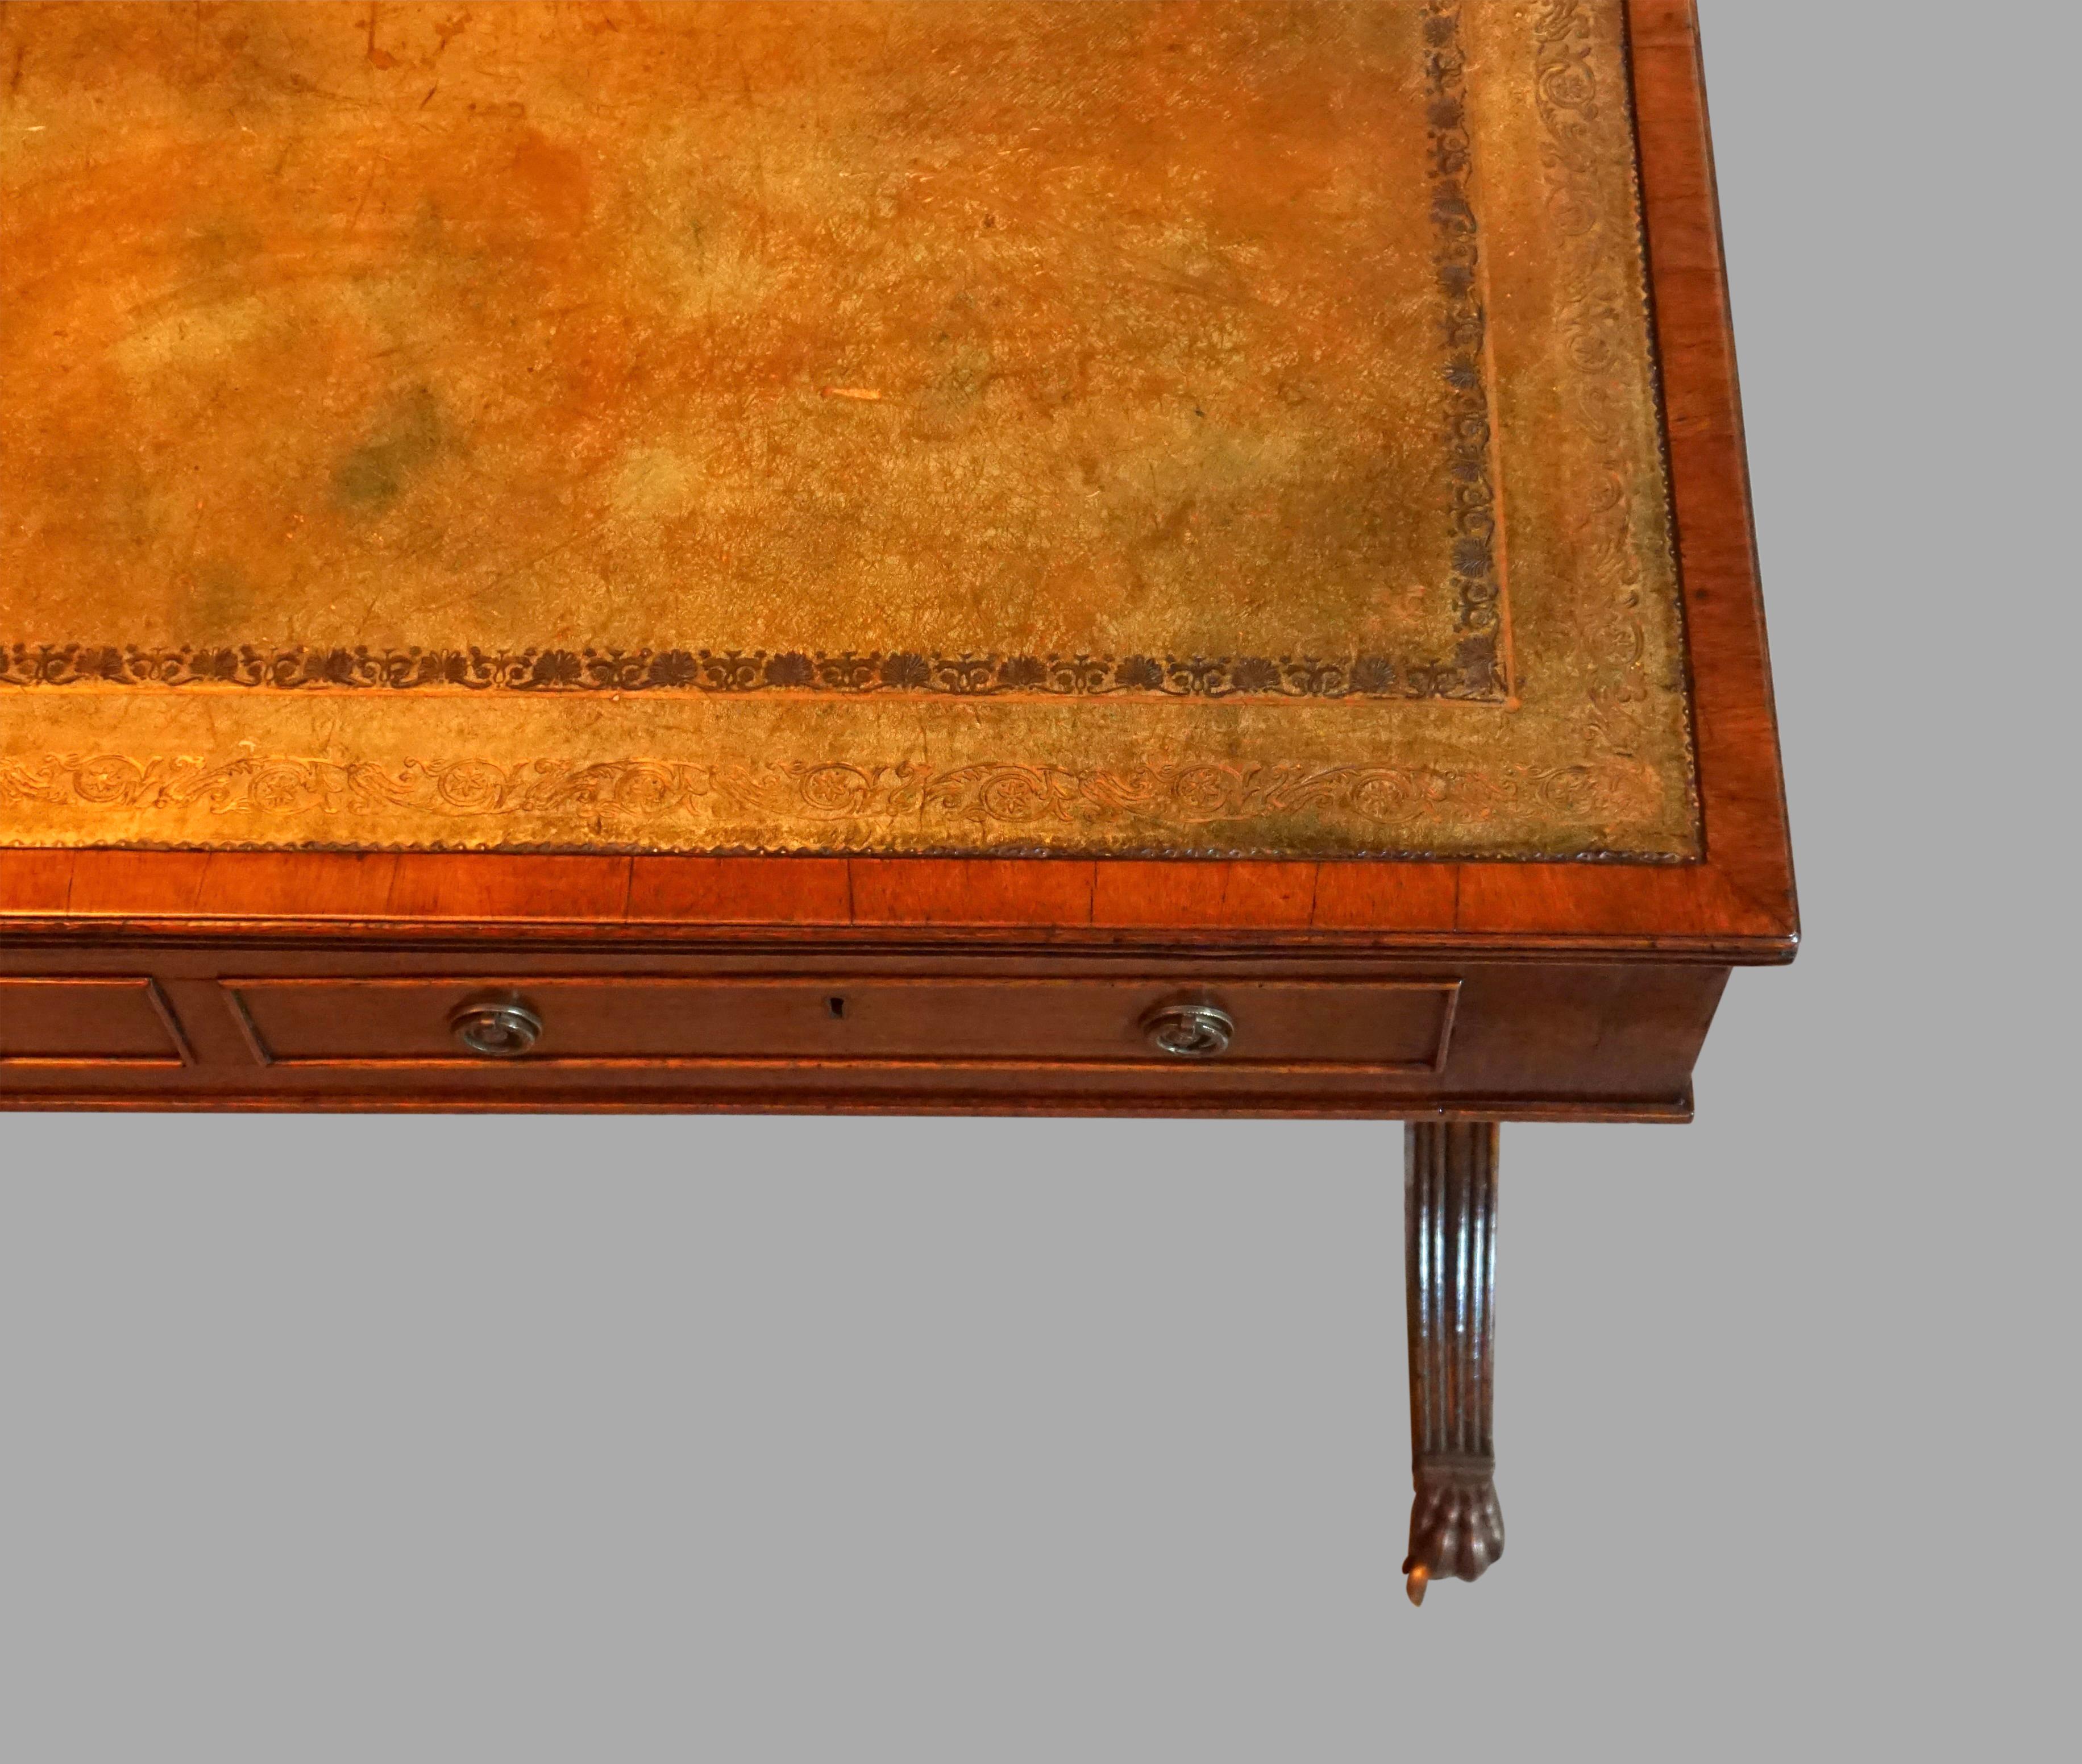 English Regency Style Mahogany Writing Table with Gilt-Tooled Leather Top For Sale 4